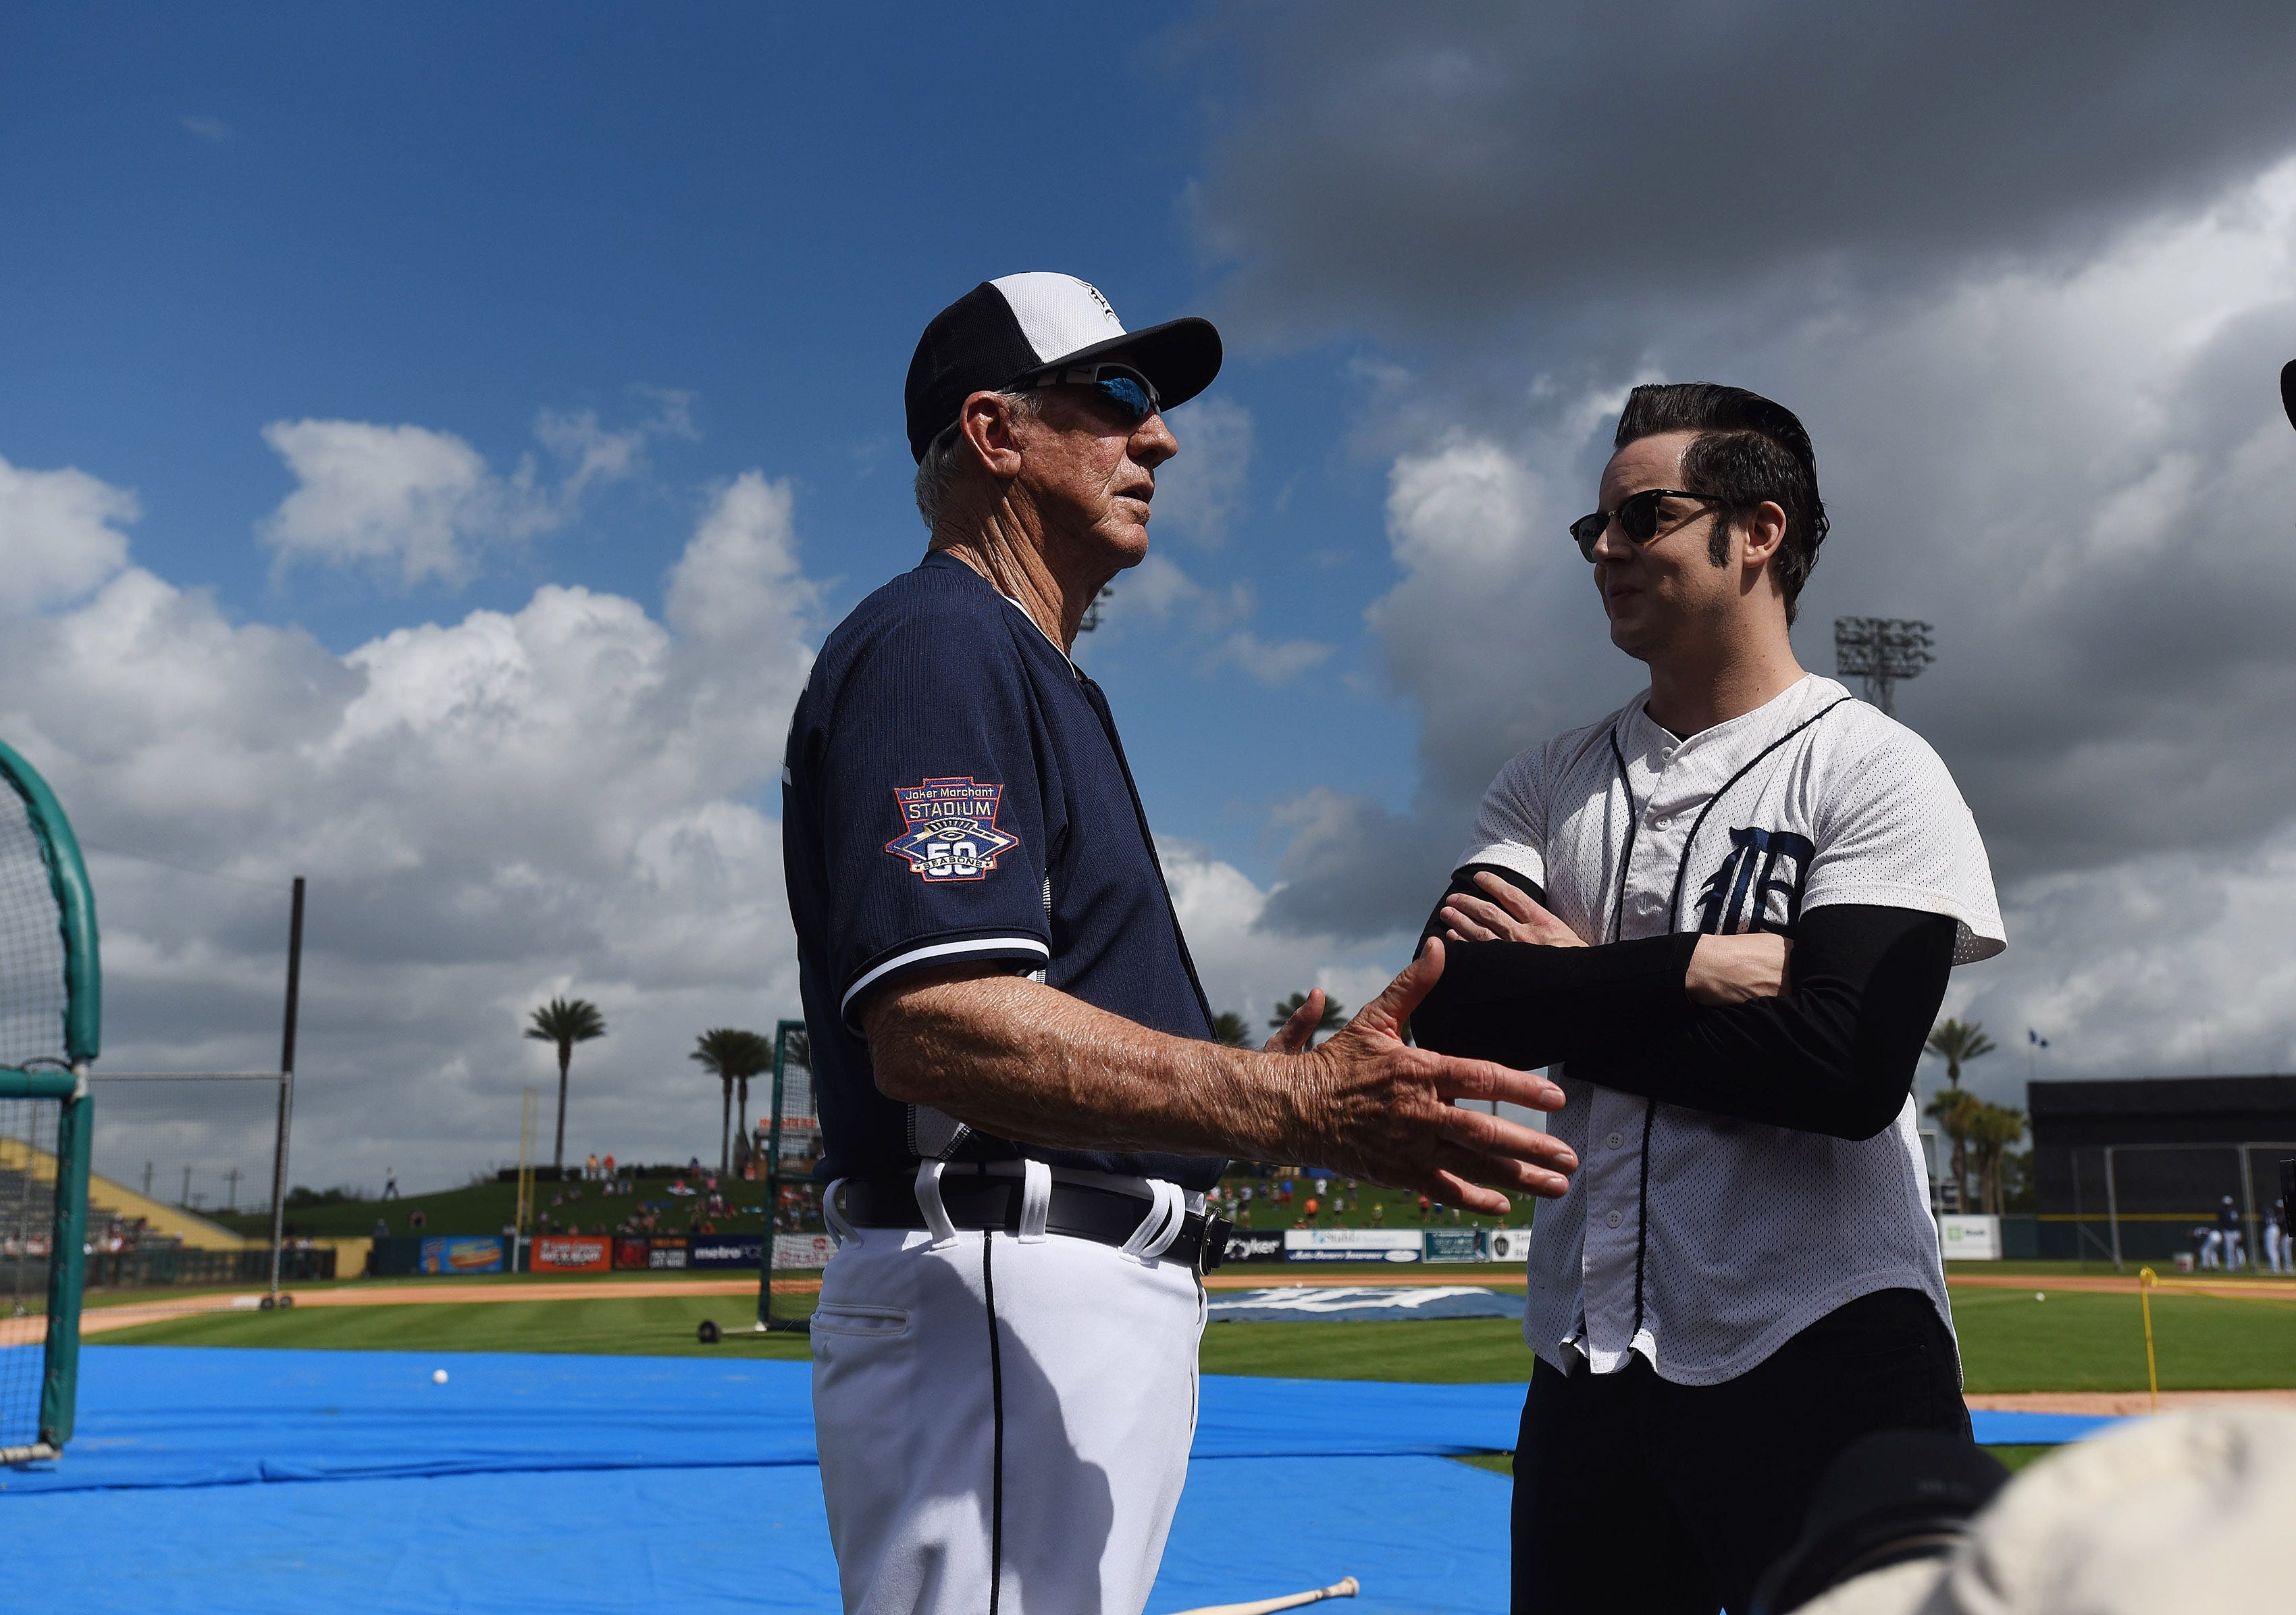 Musician Jack White, right, talks with Al Kaline during batting practice before a game against the Atlanta Braves at Joker Marchant Stadium in Lakeland, Fla. on Mar. 5, 2015.